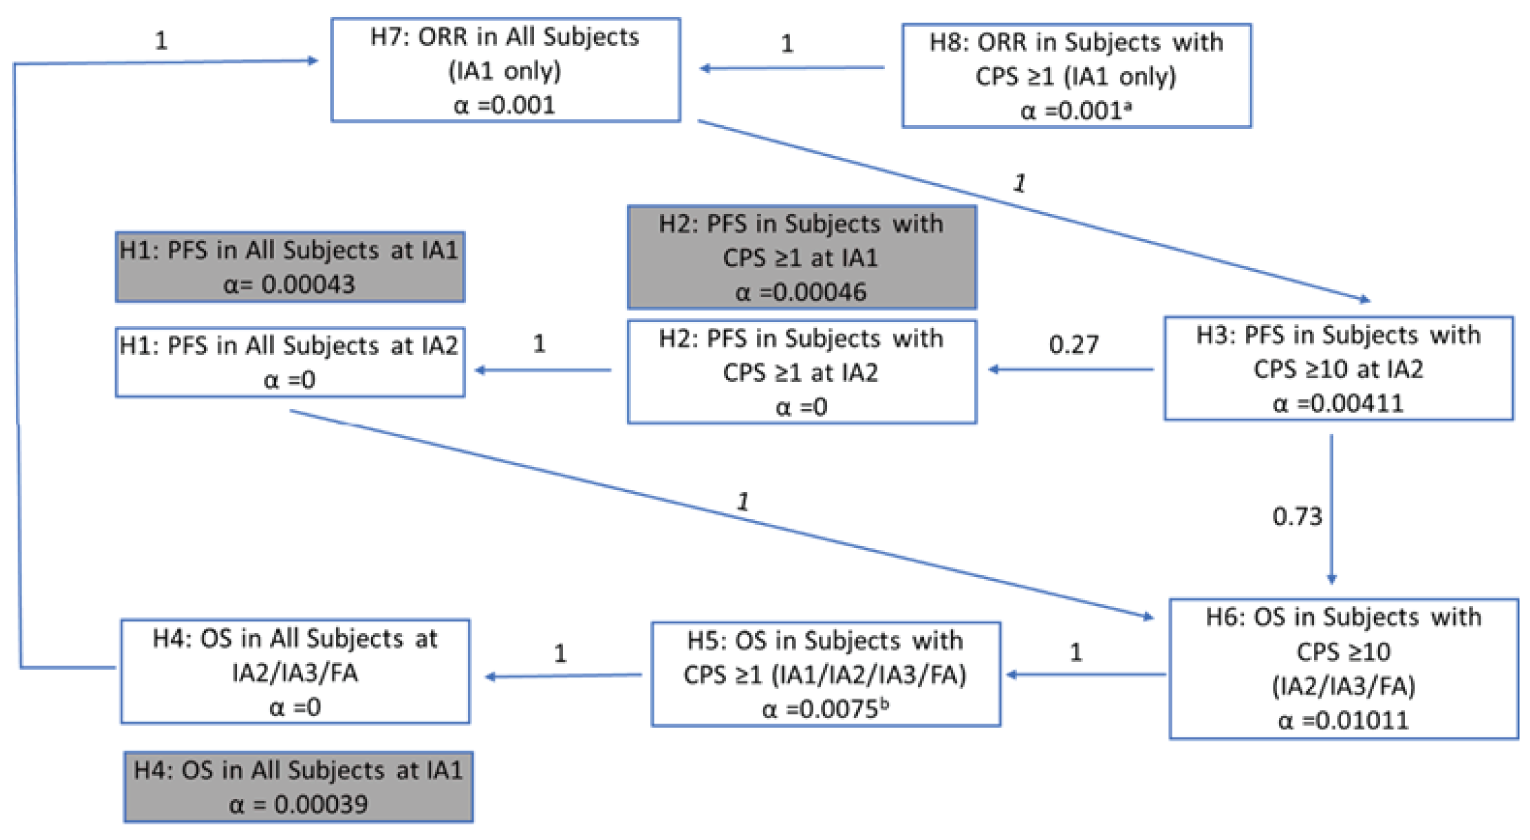 Figure 3 shows the 1-sided alpha allocation for each hypothesis. The weights for reallocation from each hypothesis to the others are represented in the boxes on the lines connecting hypotheses. Testing will first be performed in patients with a CPS of 1 or higher for a treatment effect on ORR (H8). If H8 is supported (i.e., the null hypothesis is rejected), then the corresponding alpha can be added to that allocated for evaluating the treatment effect on ORR in all patients (H7). If H7 is supported, then the corresponding alpha can be reallocated to PFS in patients with a CPS of 10 or higher (H3). If H3 is supported, then the corresponding alpha can be reallocated, 27% to PFS in patients with a CPS of 1 or higher (H2 at IA2 only) and 73% to OS in patients with a CPS of 10 or higher (H6). If H2 is supported, the alpha for that hypothesis can be reallocated to PFS in all patients (H1 at IA2 only). If H1 is supported, the alpha for that hypothesis can be reallocated to OS in patients with a CPS of 10 or higher (H6). If H6 is supported, the alpha for that hypothesis can then be reallocated to OS in patients with a CPS of 1 or higher (H5). If H5 is supported, the alpha for that hypothesis can then be reallocated to OS in all patients (H4 at IA2, IA3, or final analysis). If H4 is supported, at IA2, IA3, and final analysis, the alpha for that hypothesis can be reallocated back to H7.